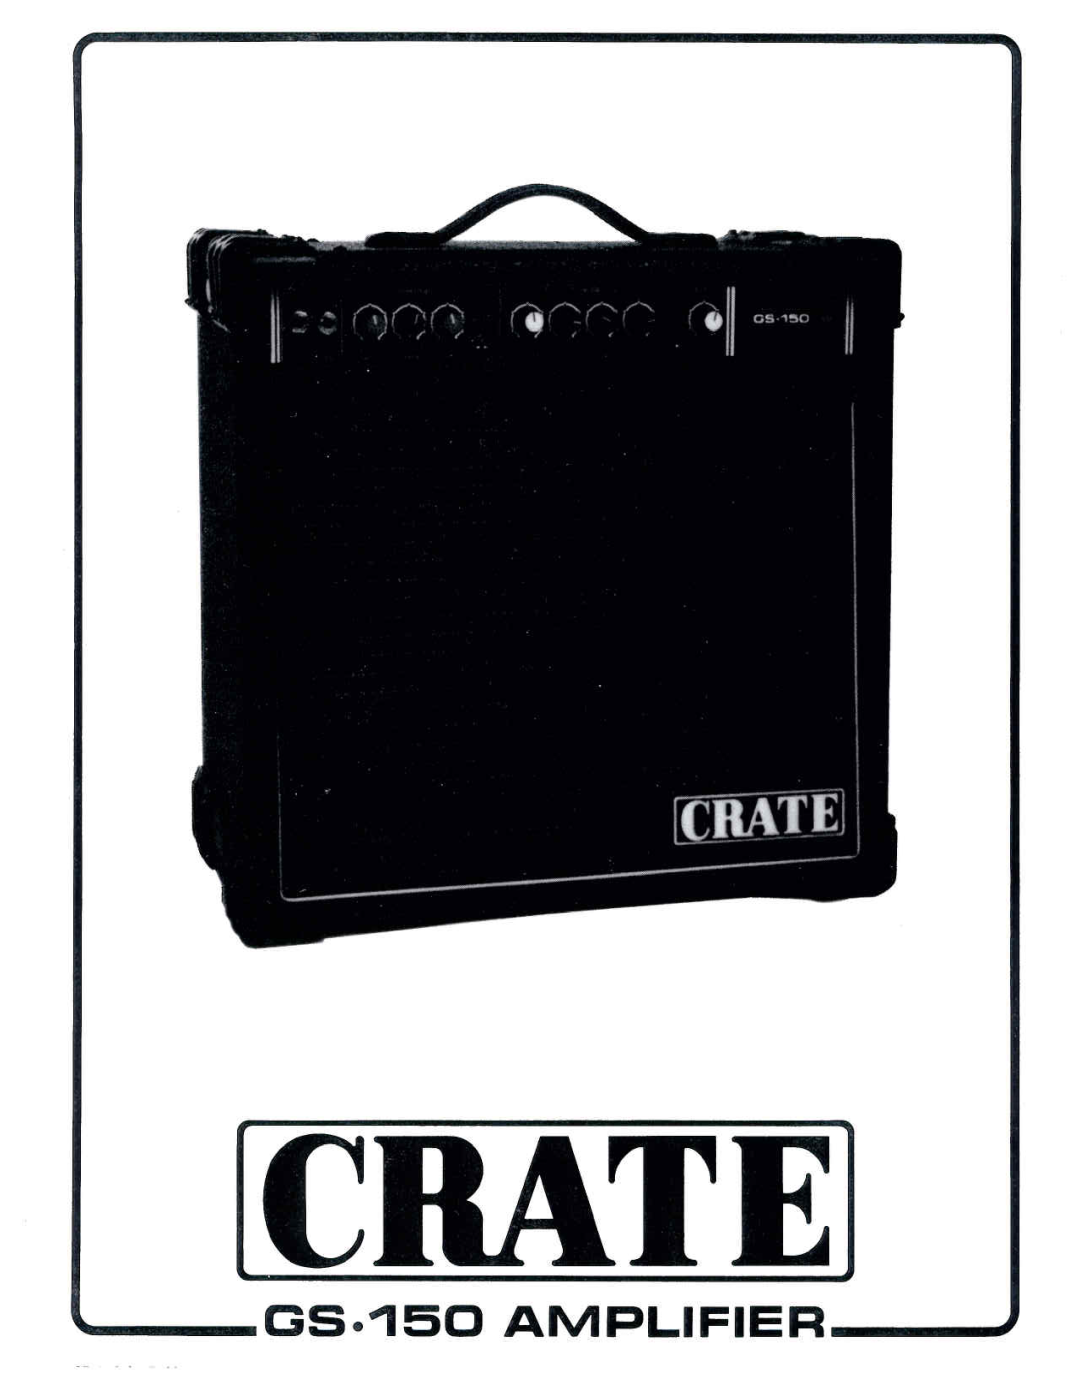 Crate Amplifiers GS.150 manual 